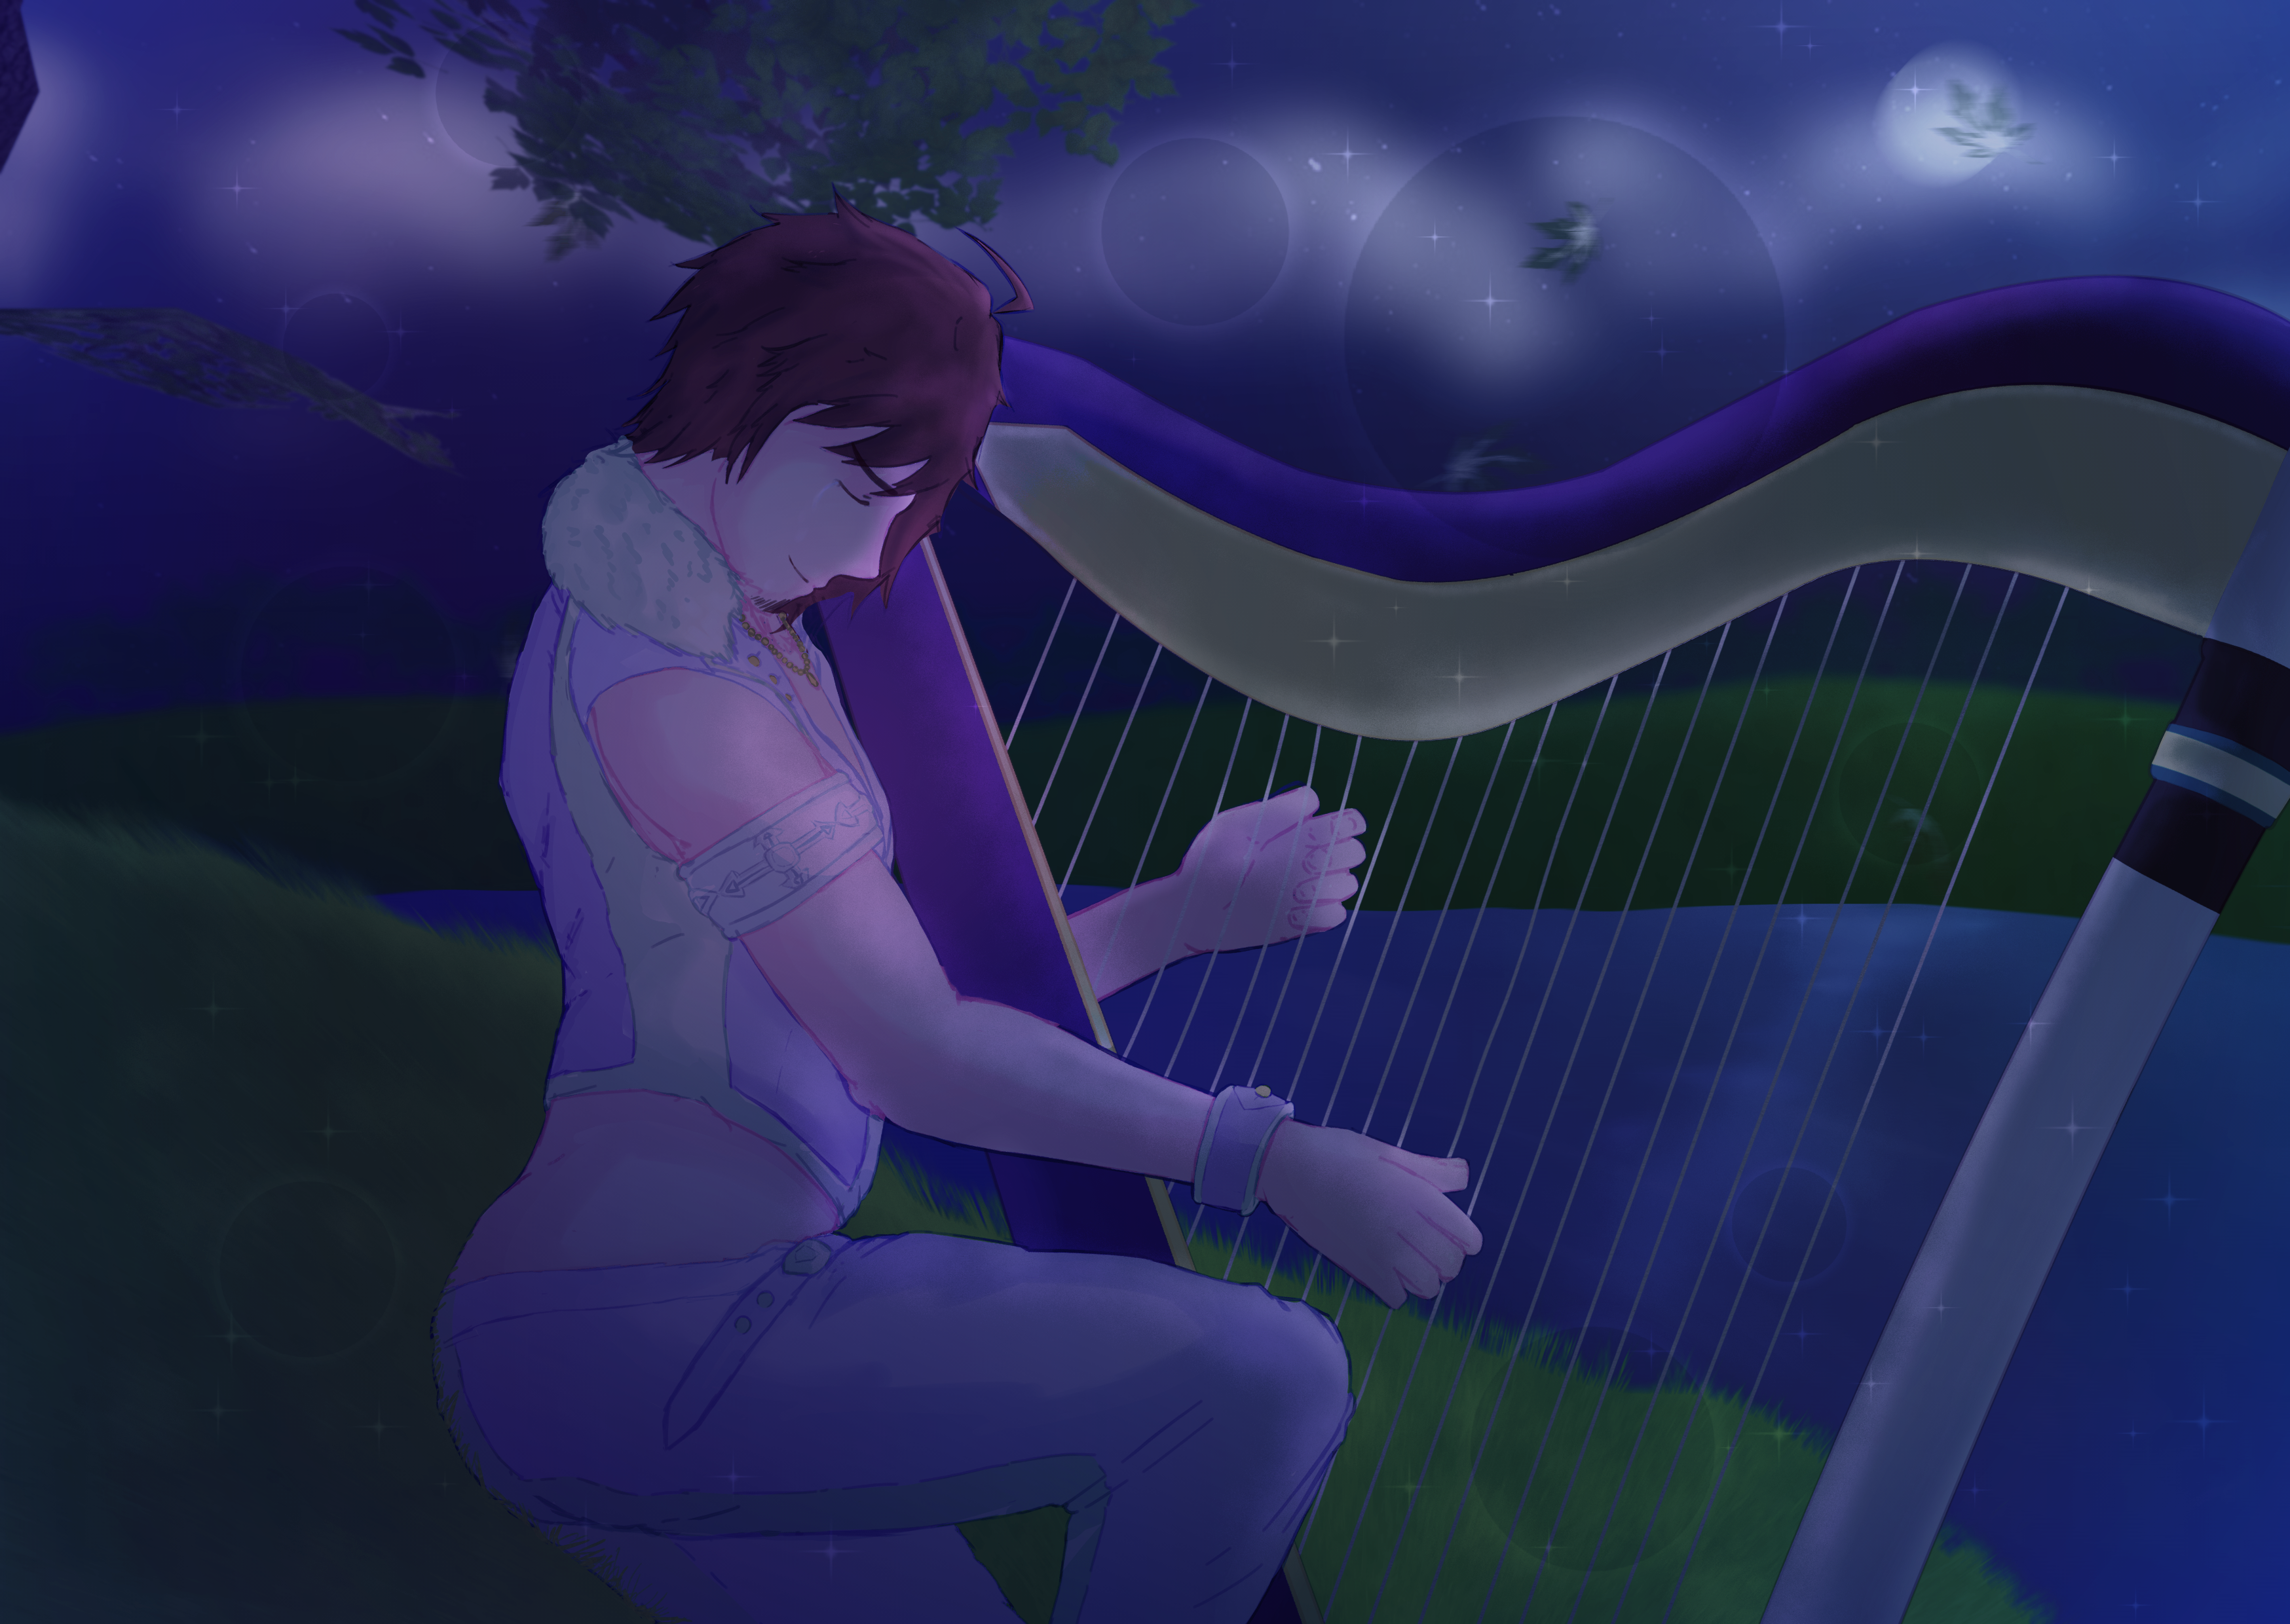 An illustration of Teru Tendo, at night, playing the harp. He is in his in Idol Debut Card outfit! This was made in February 2022, before joining my art school. man! time flies.